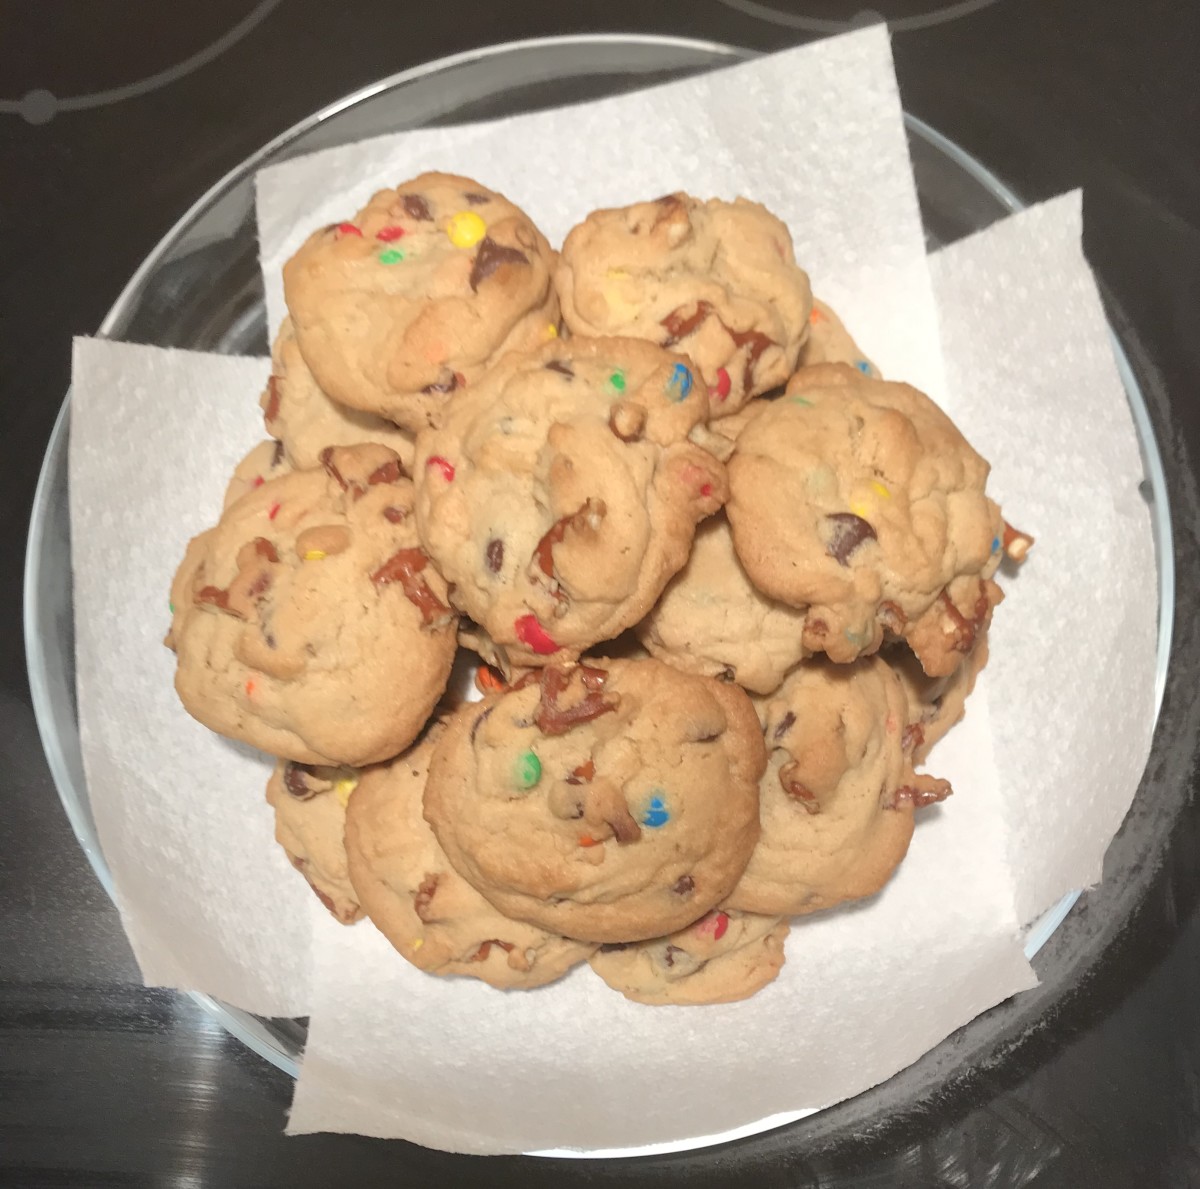 Kitchen Sink Cookies: The Perfect Balance of Salty and Sweet